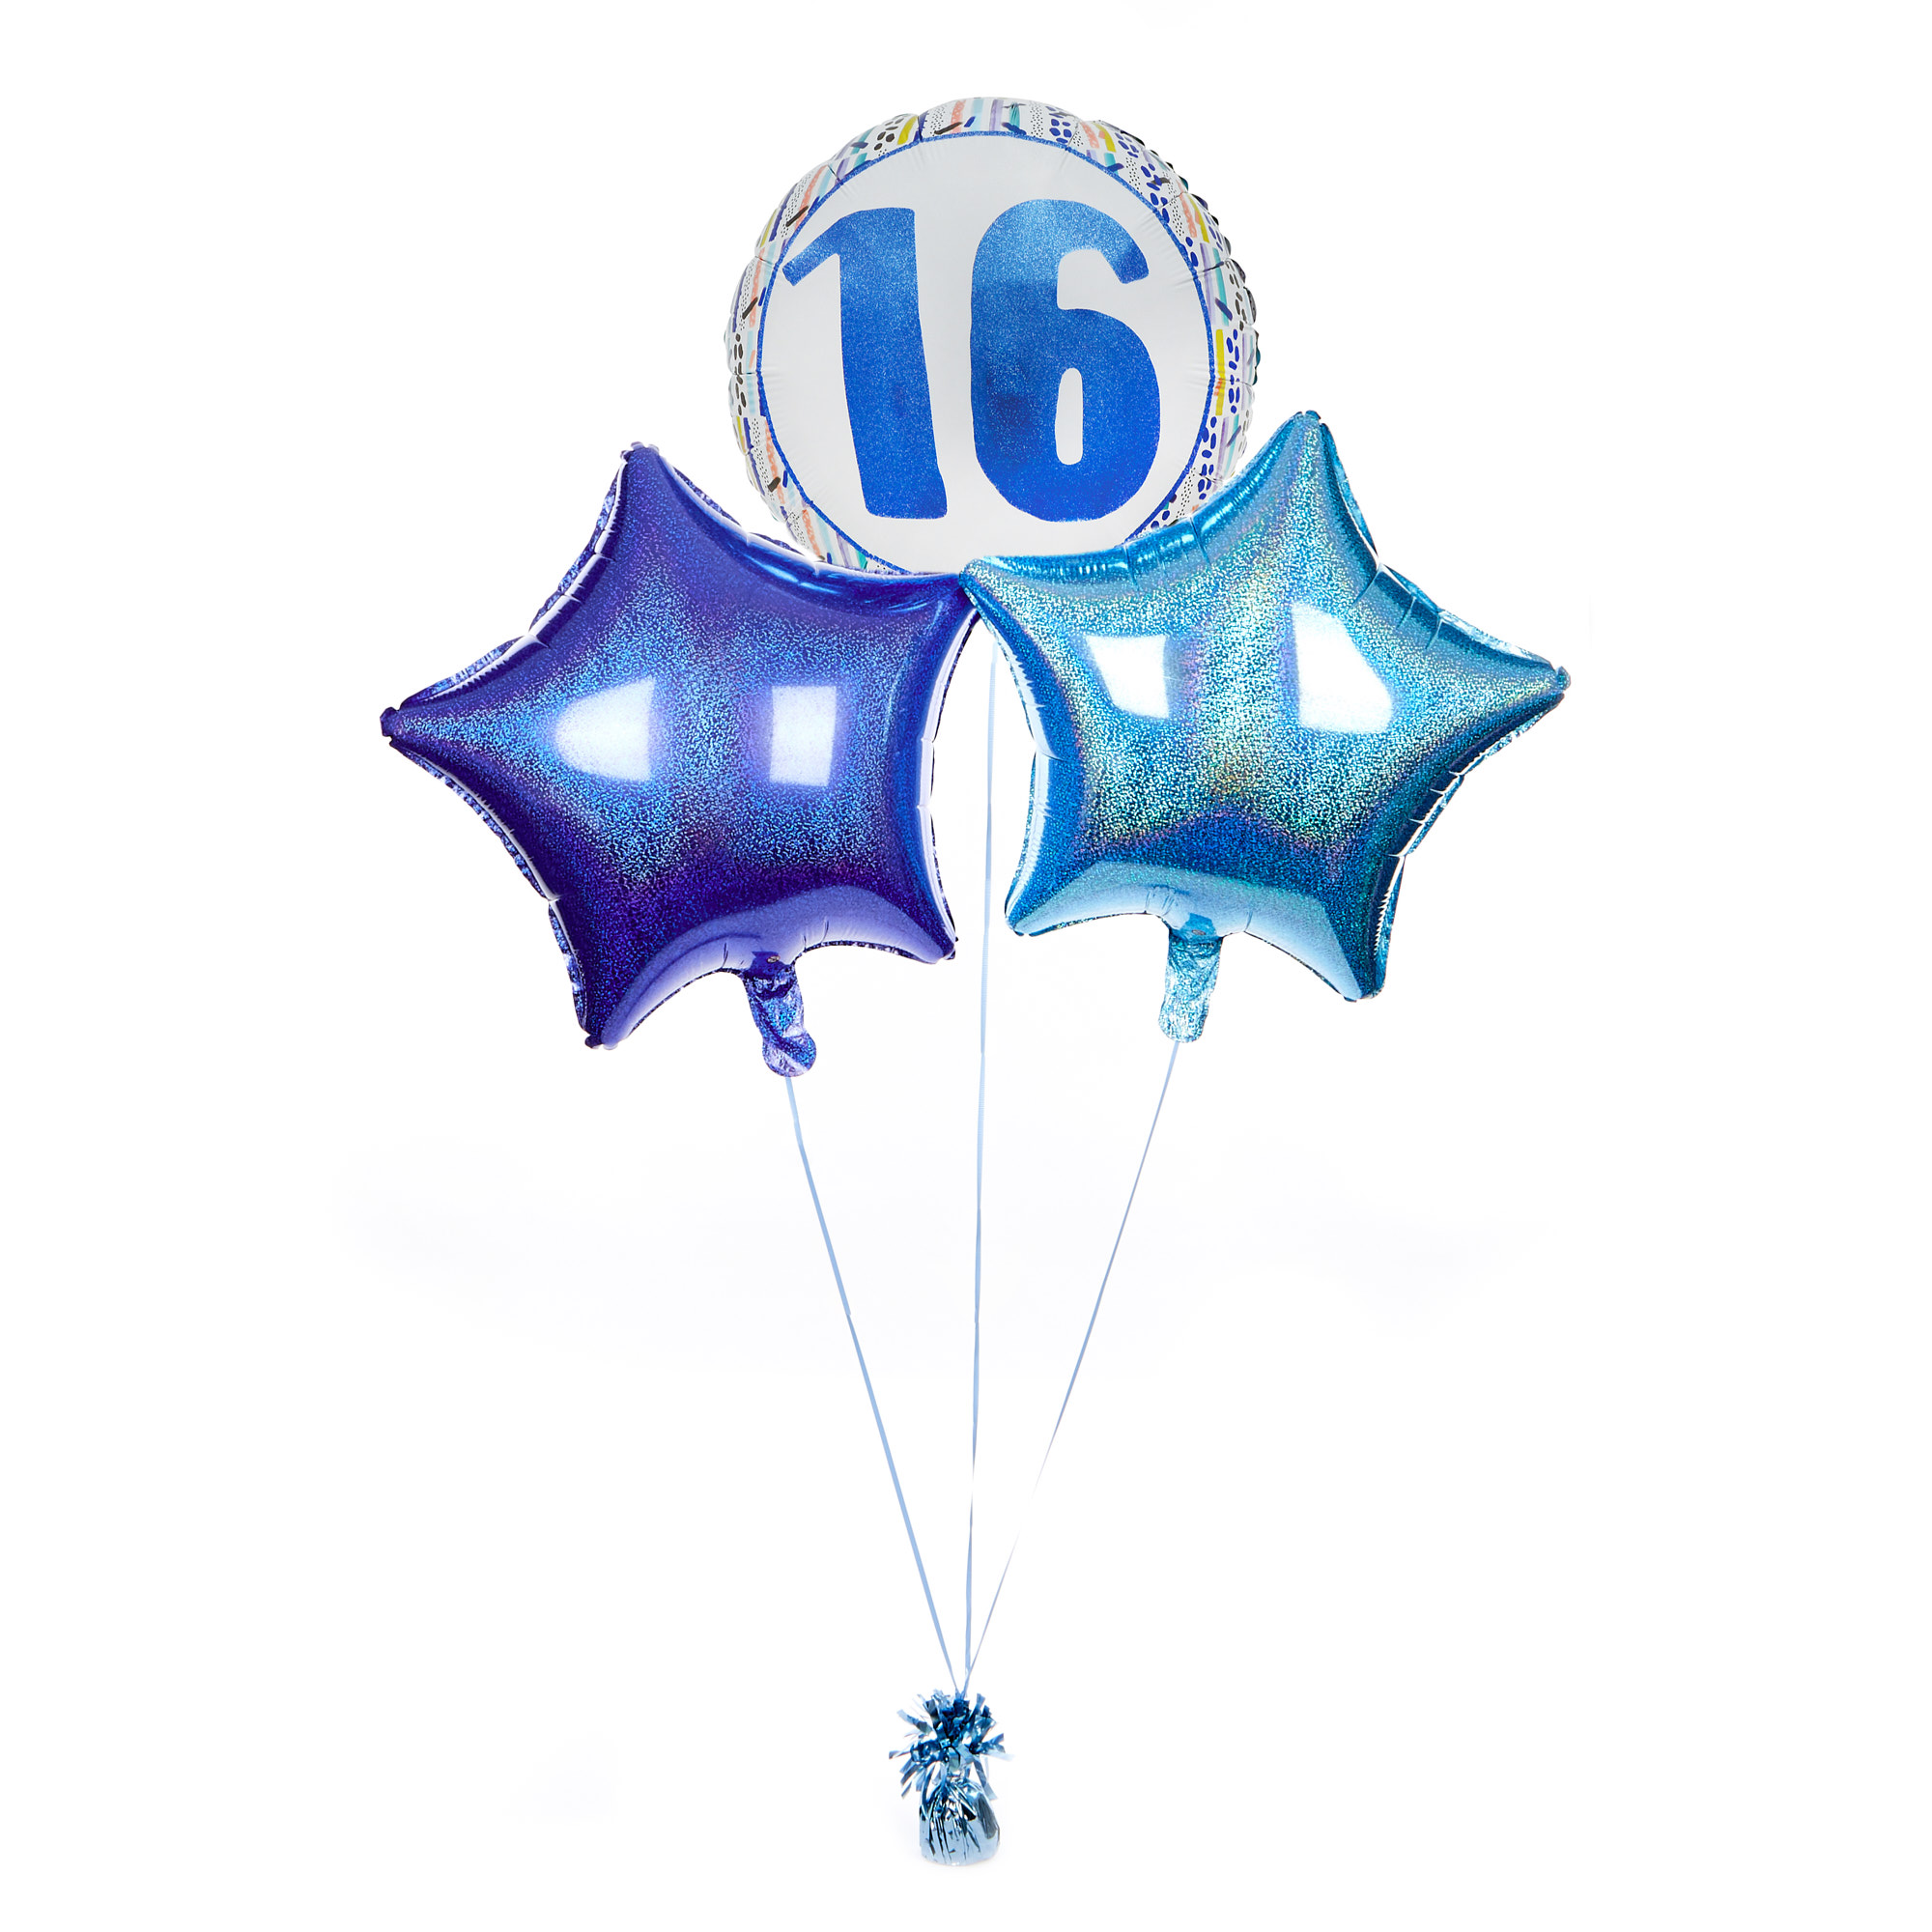 Blue Patterned 16th Birthday Balloon Bouquet - DELIVERED INFLATED!